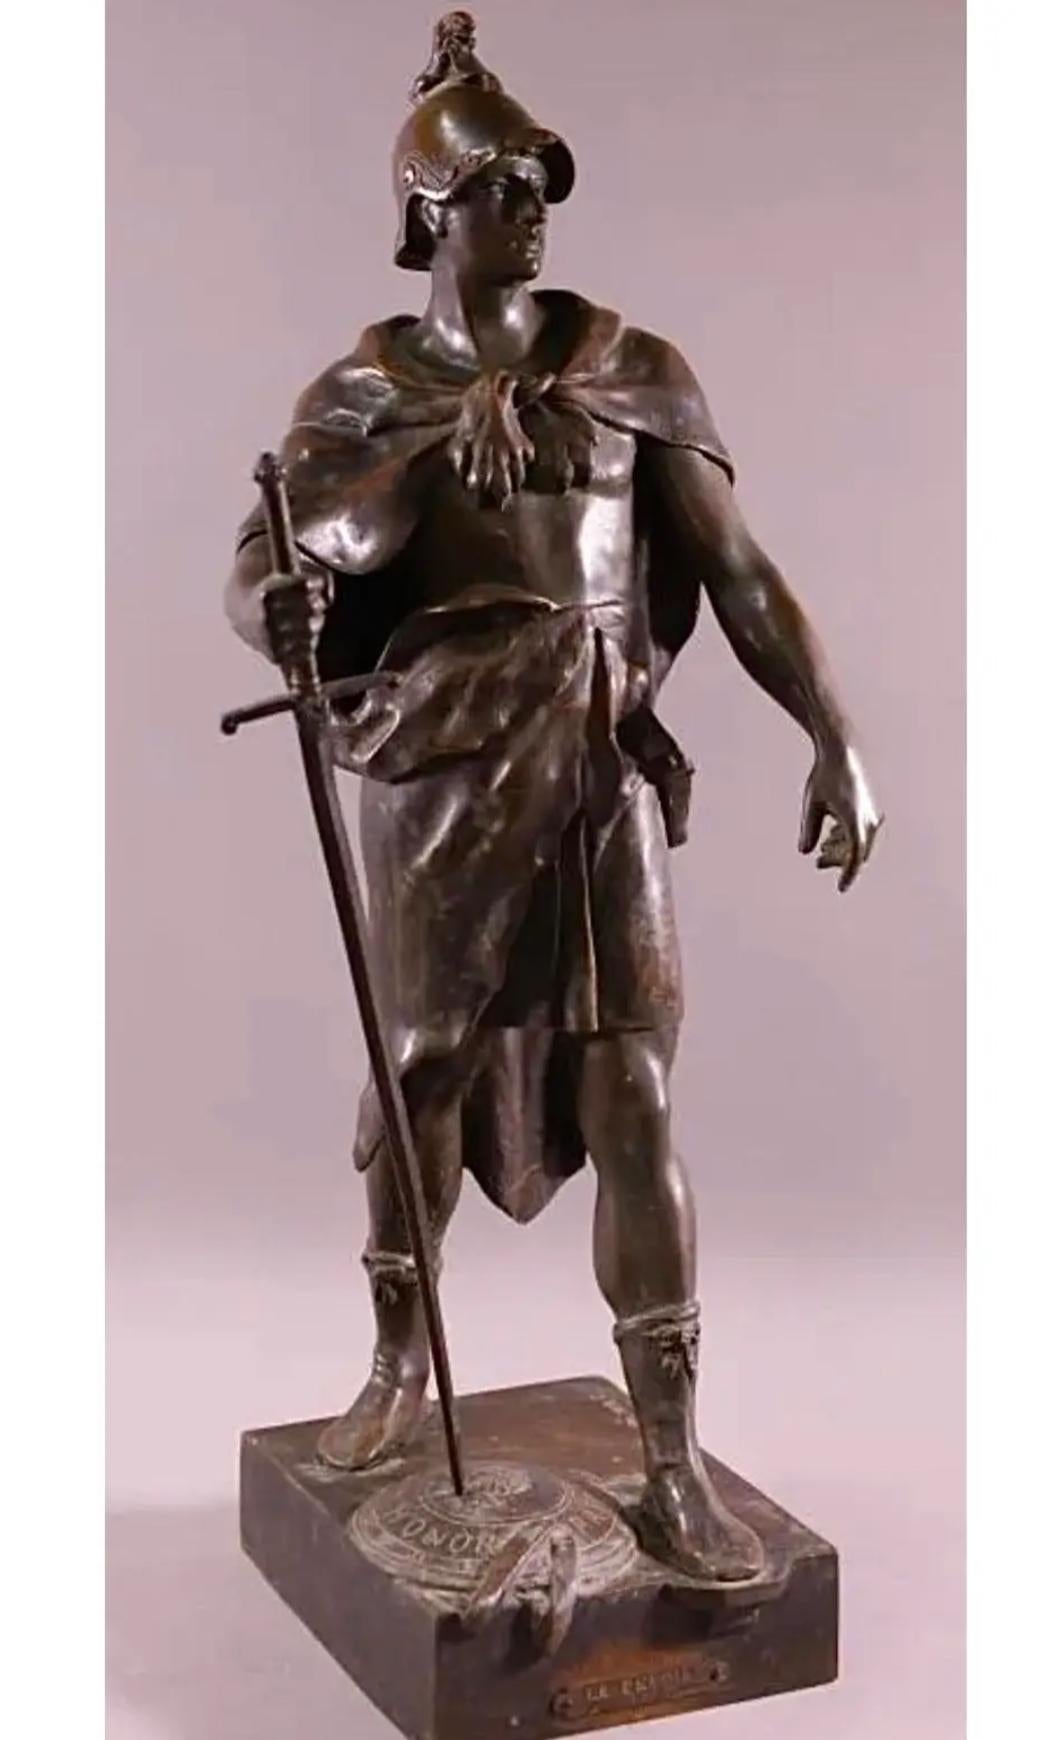 Late 19th Century Huge Antique French Bronze Roman Soldier Sculpture by Picault For Sale